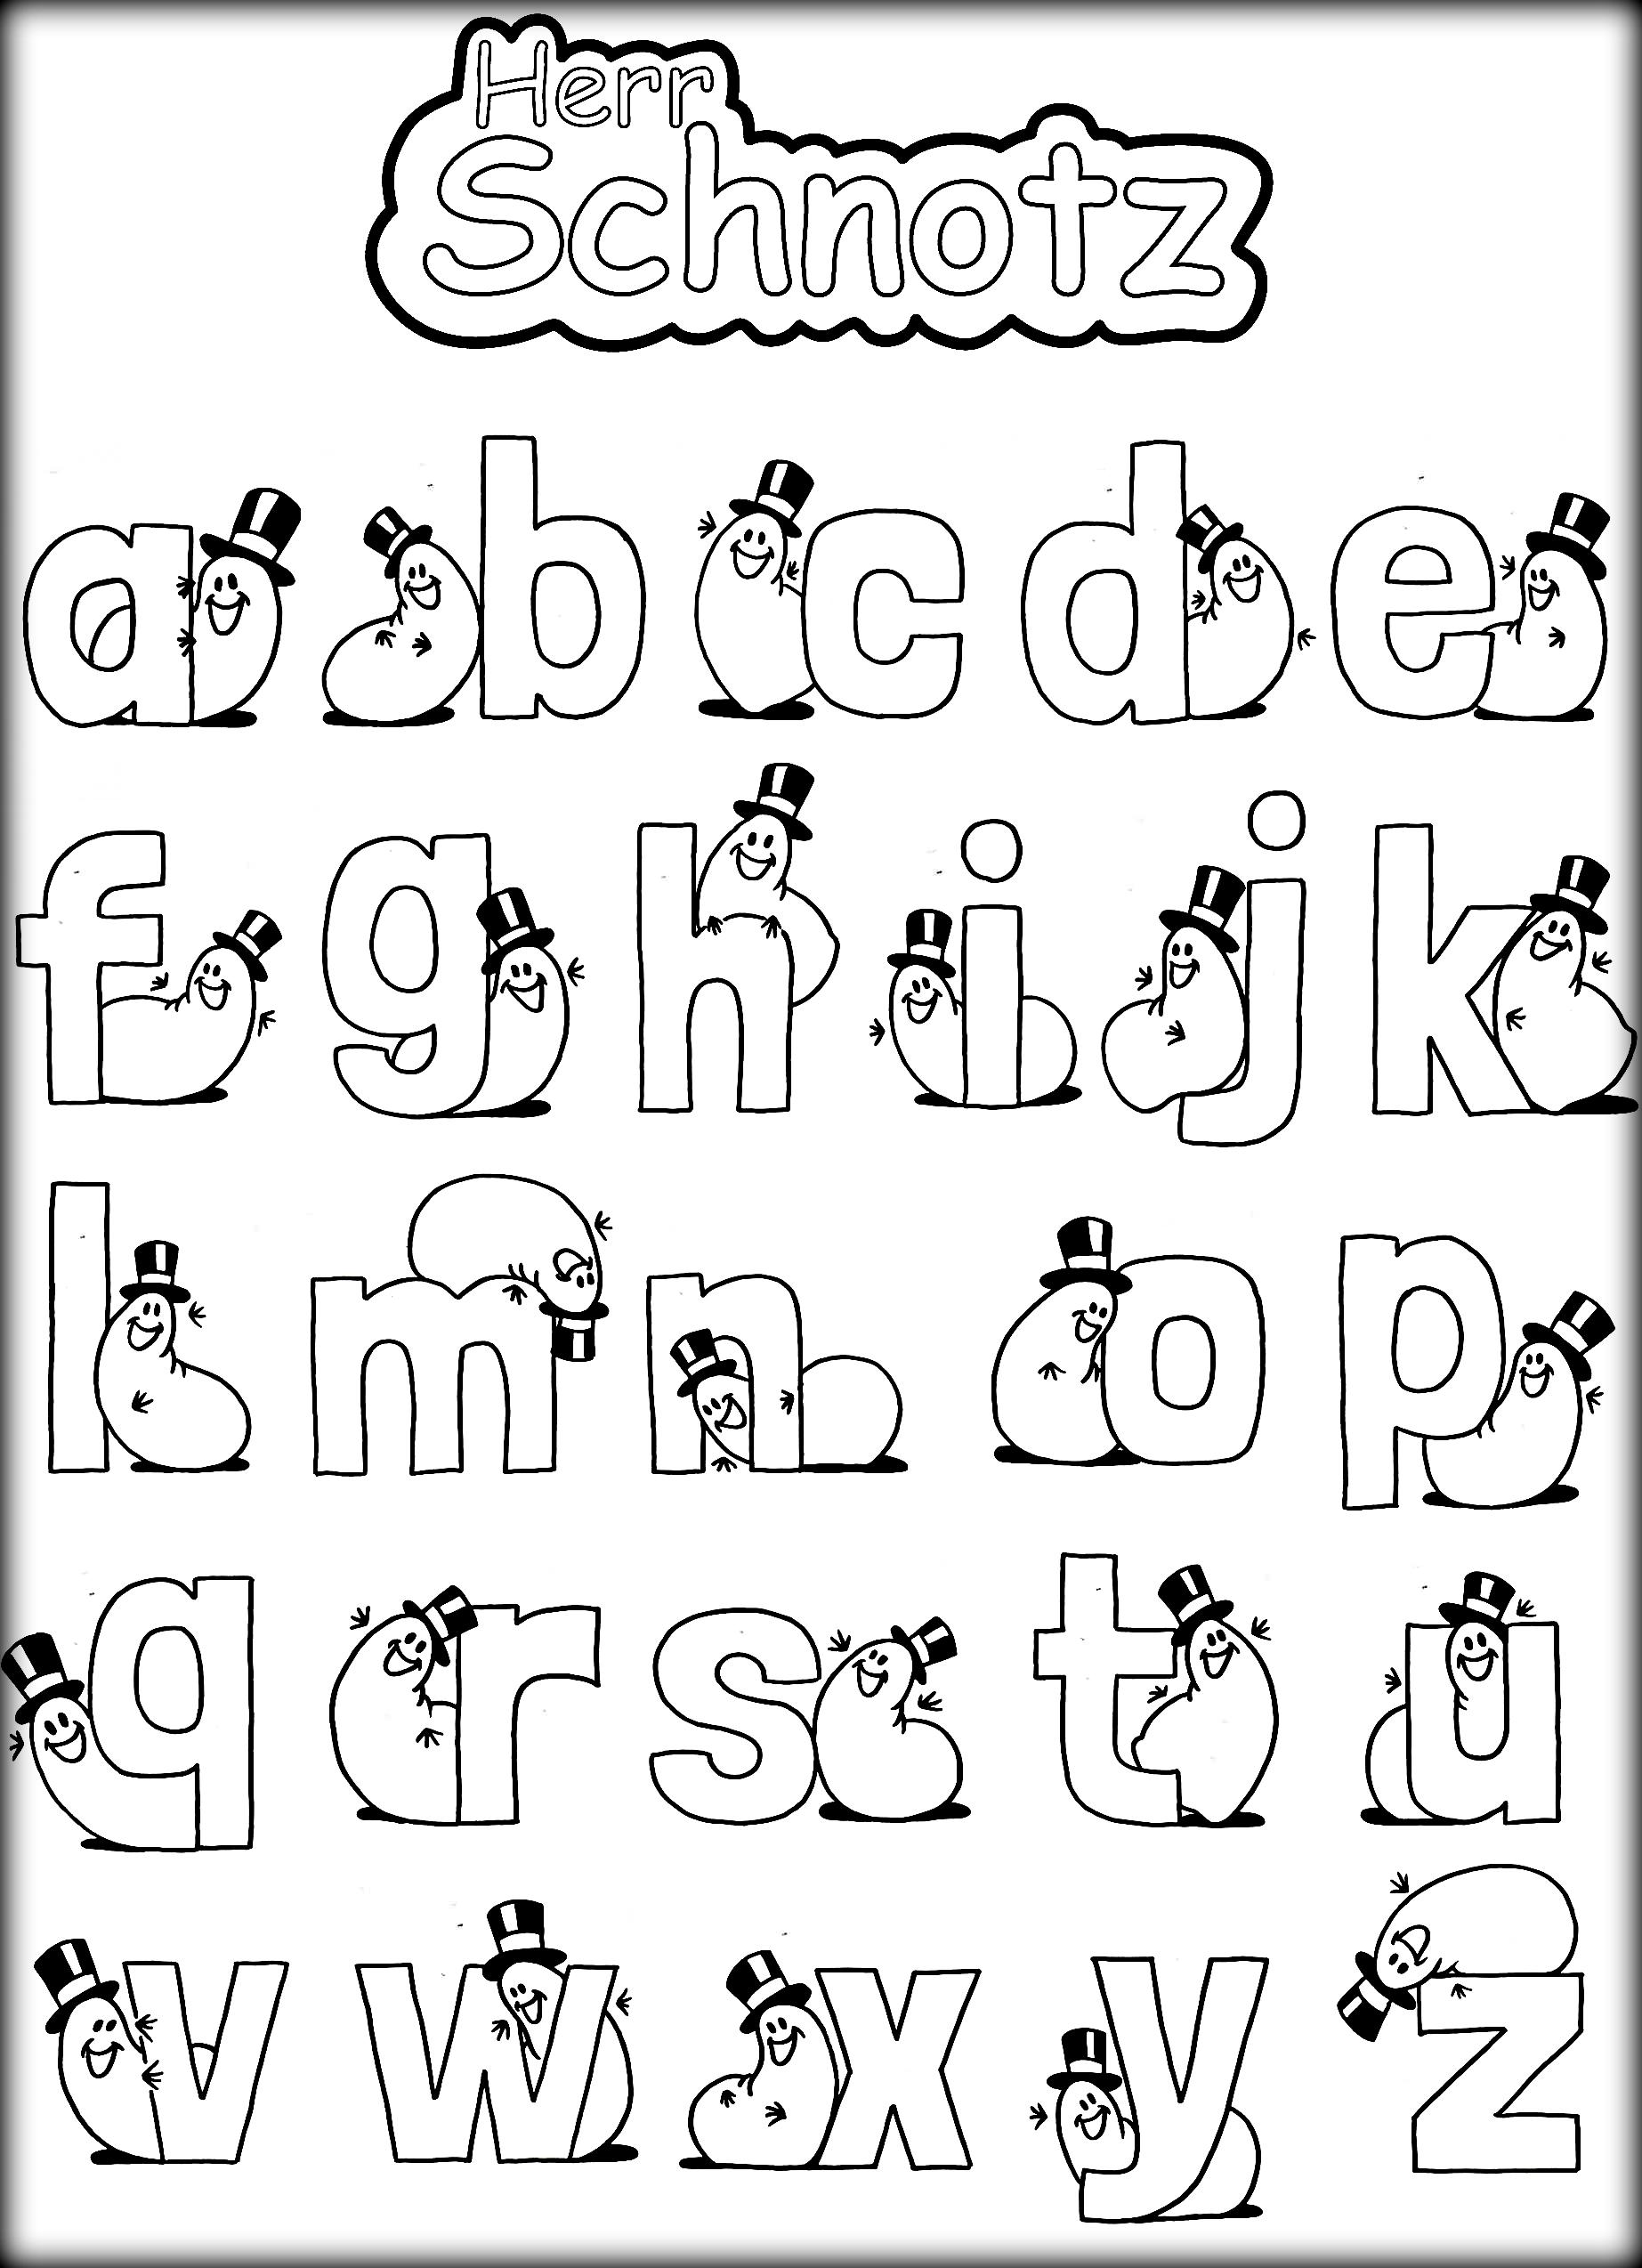 Coloring Pages Of Alphabet Free Printable Alphabet Coloring Pages For